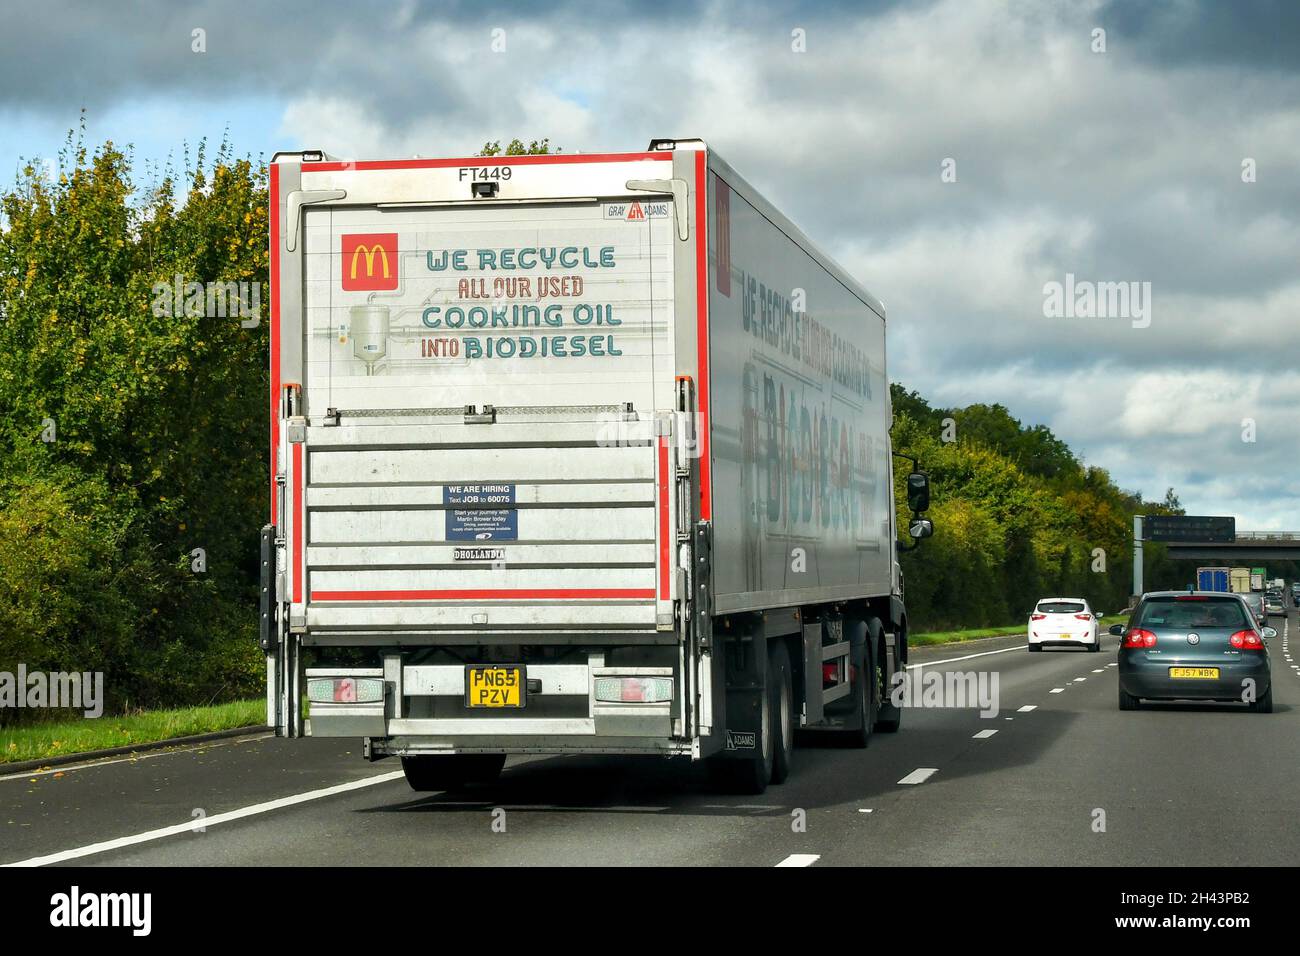 Birmingham, Eng;land - October 2021: Rear view of an articulated lorry delivering to McDonalds fast food restaurants. Stock Photo